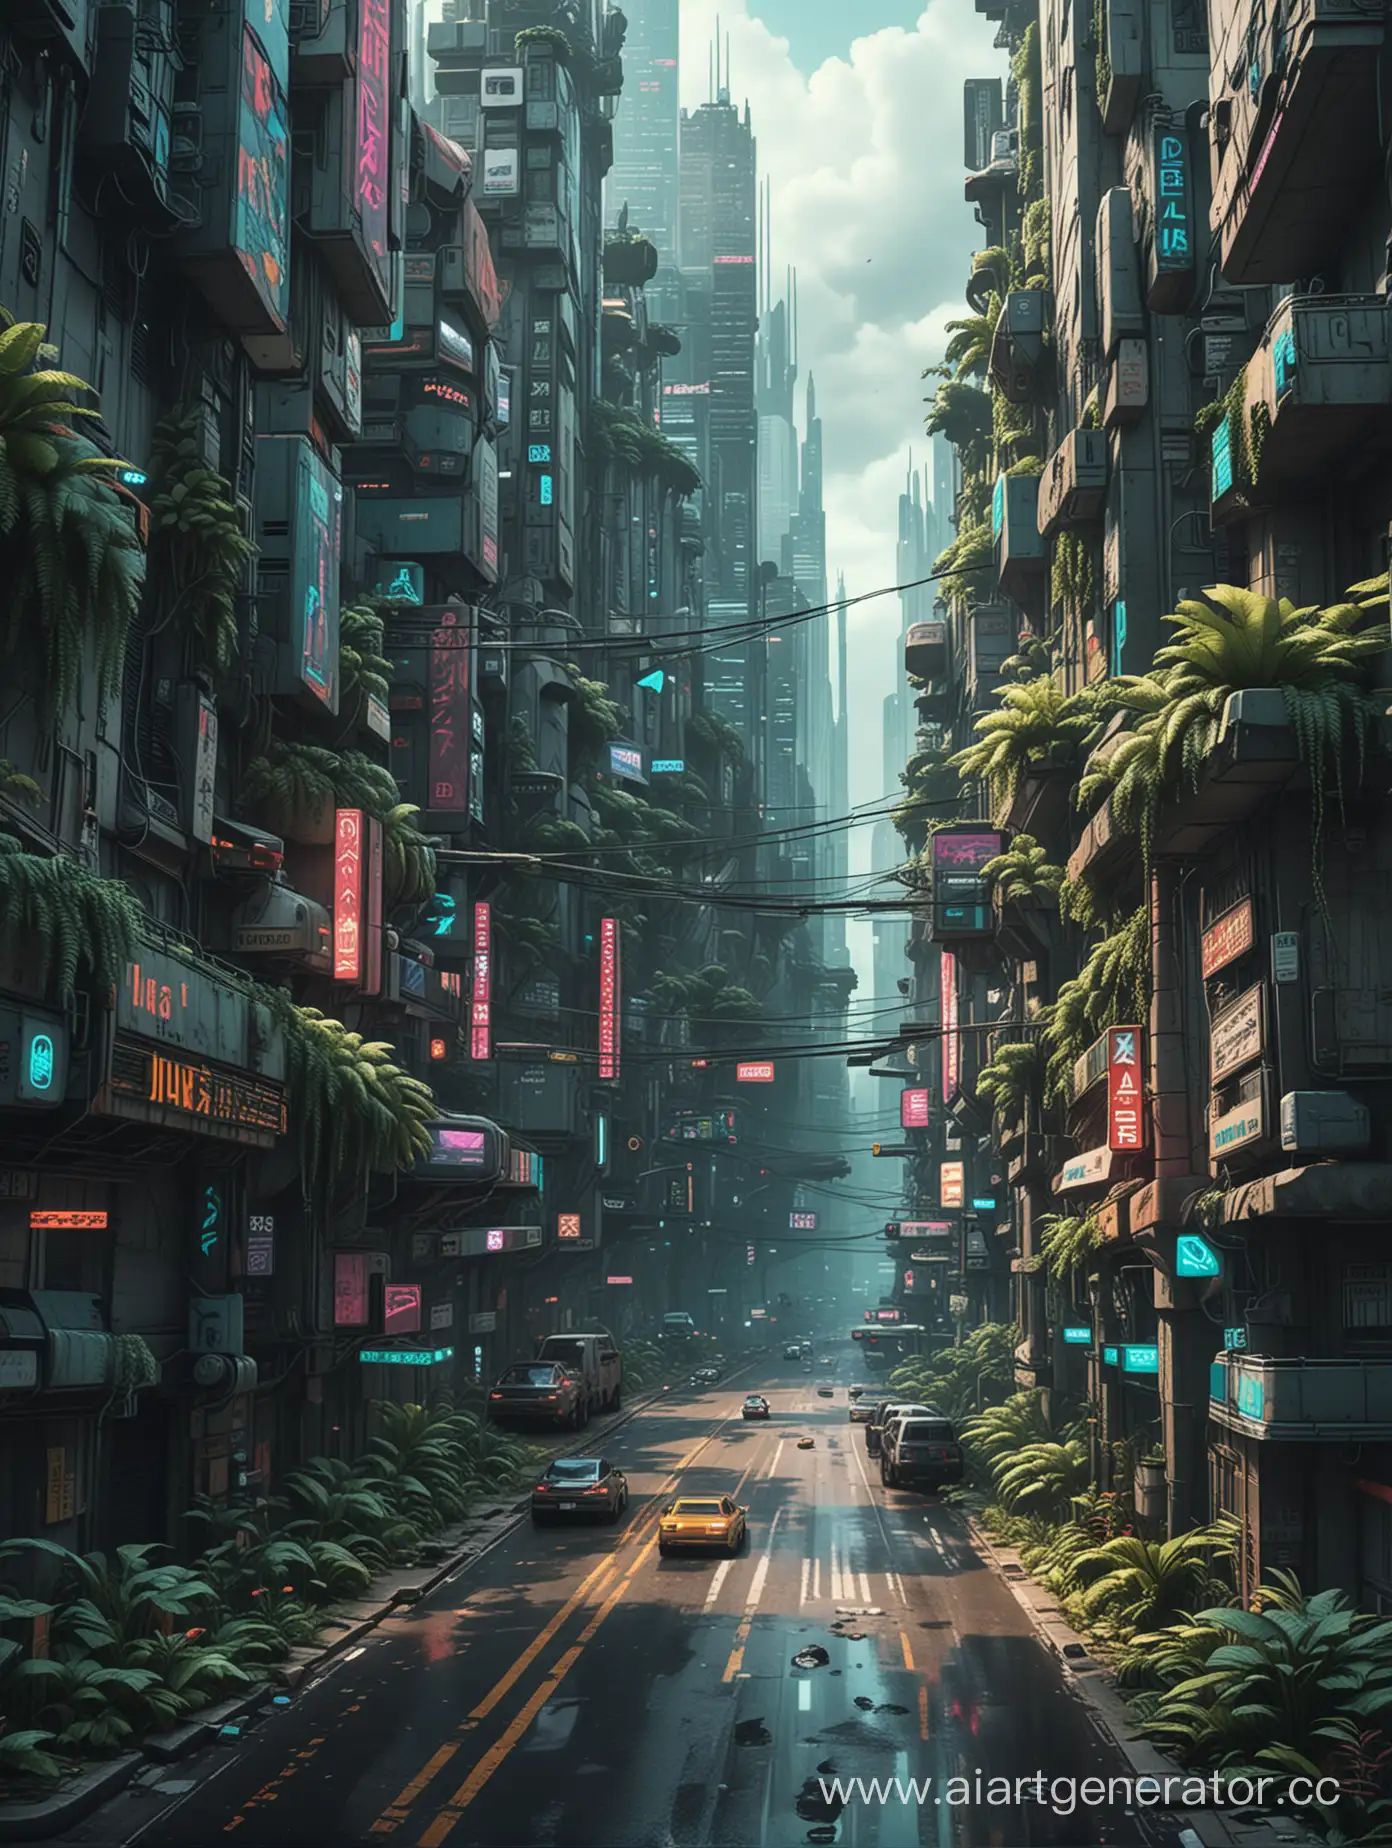 A big city in the Cyberpunk style, with multi-height buildings and signs in an unknown language. There is quite a lot of vegetation in the city, located on the sides of the roads. The roads are wide, and a large number of cars move along them.